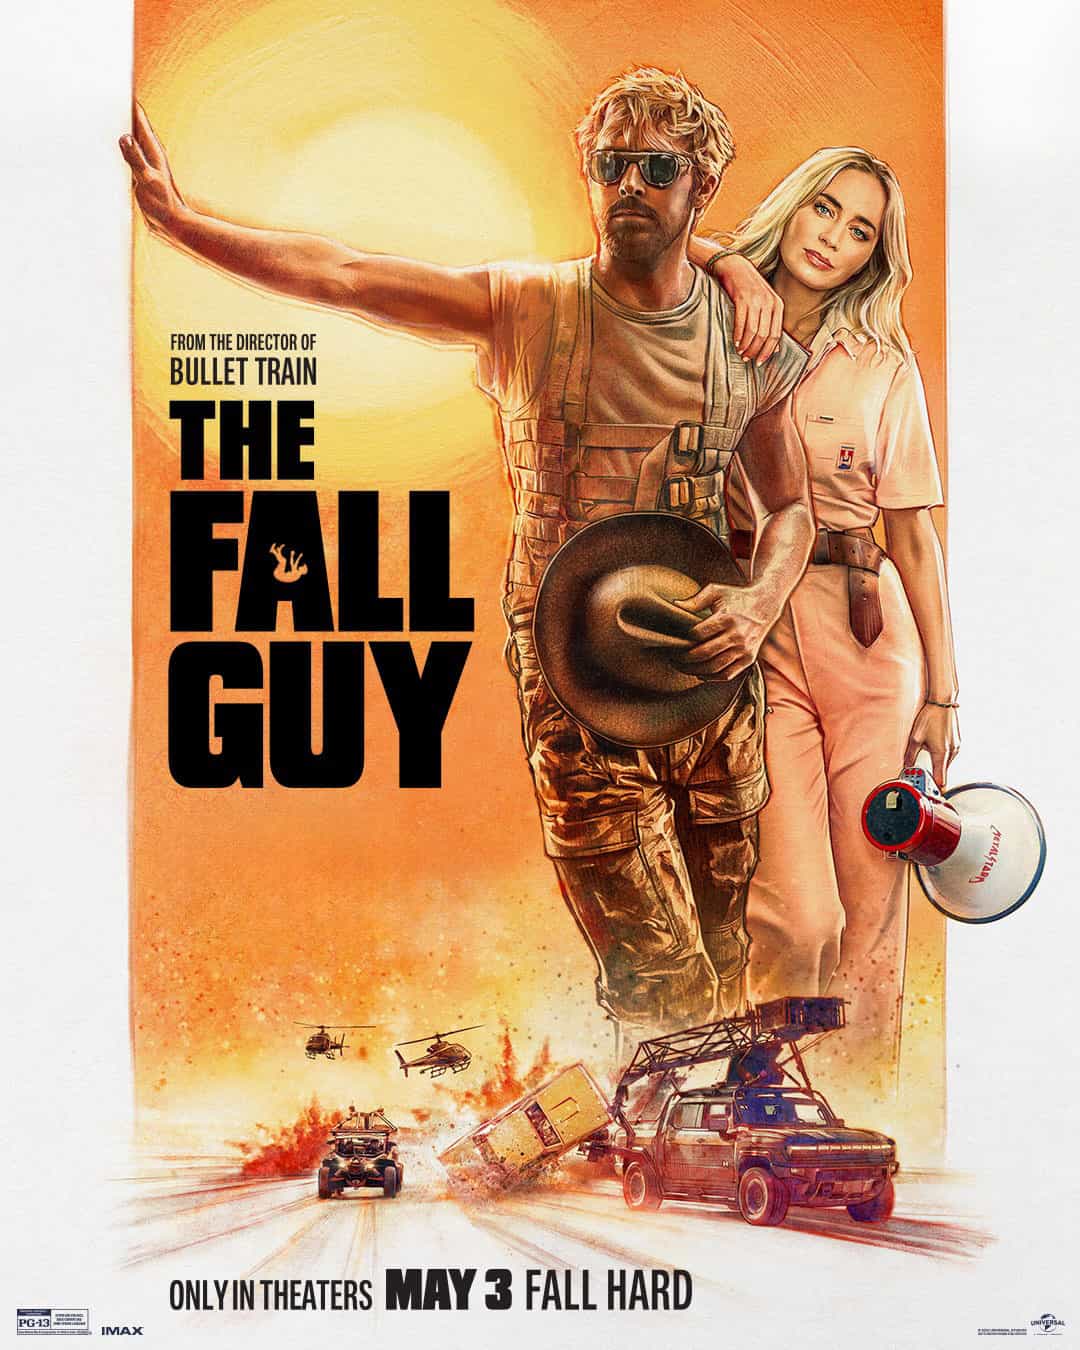 The Fall Guy is given a 12A age rating in the UK for moderate violence, infrequent strong language, drug references